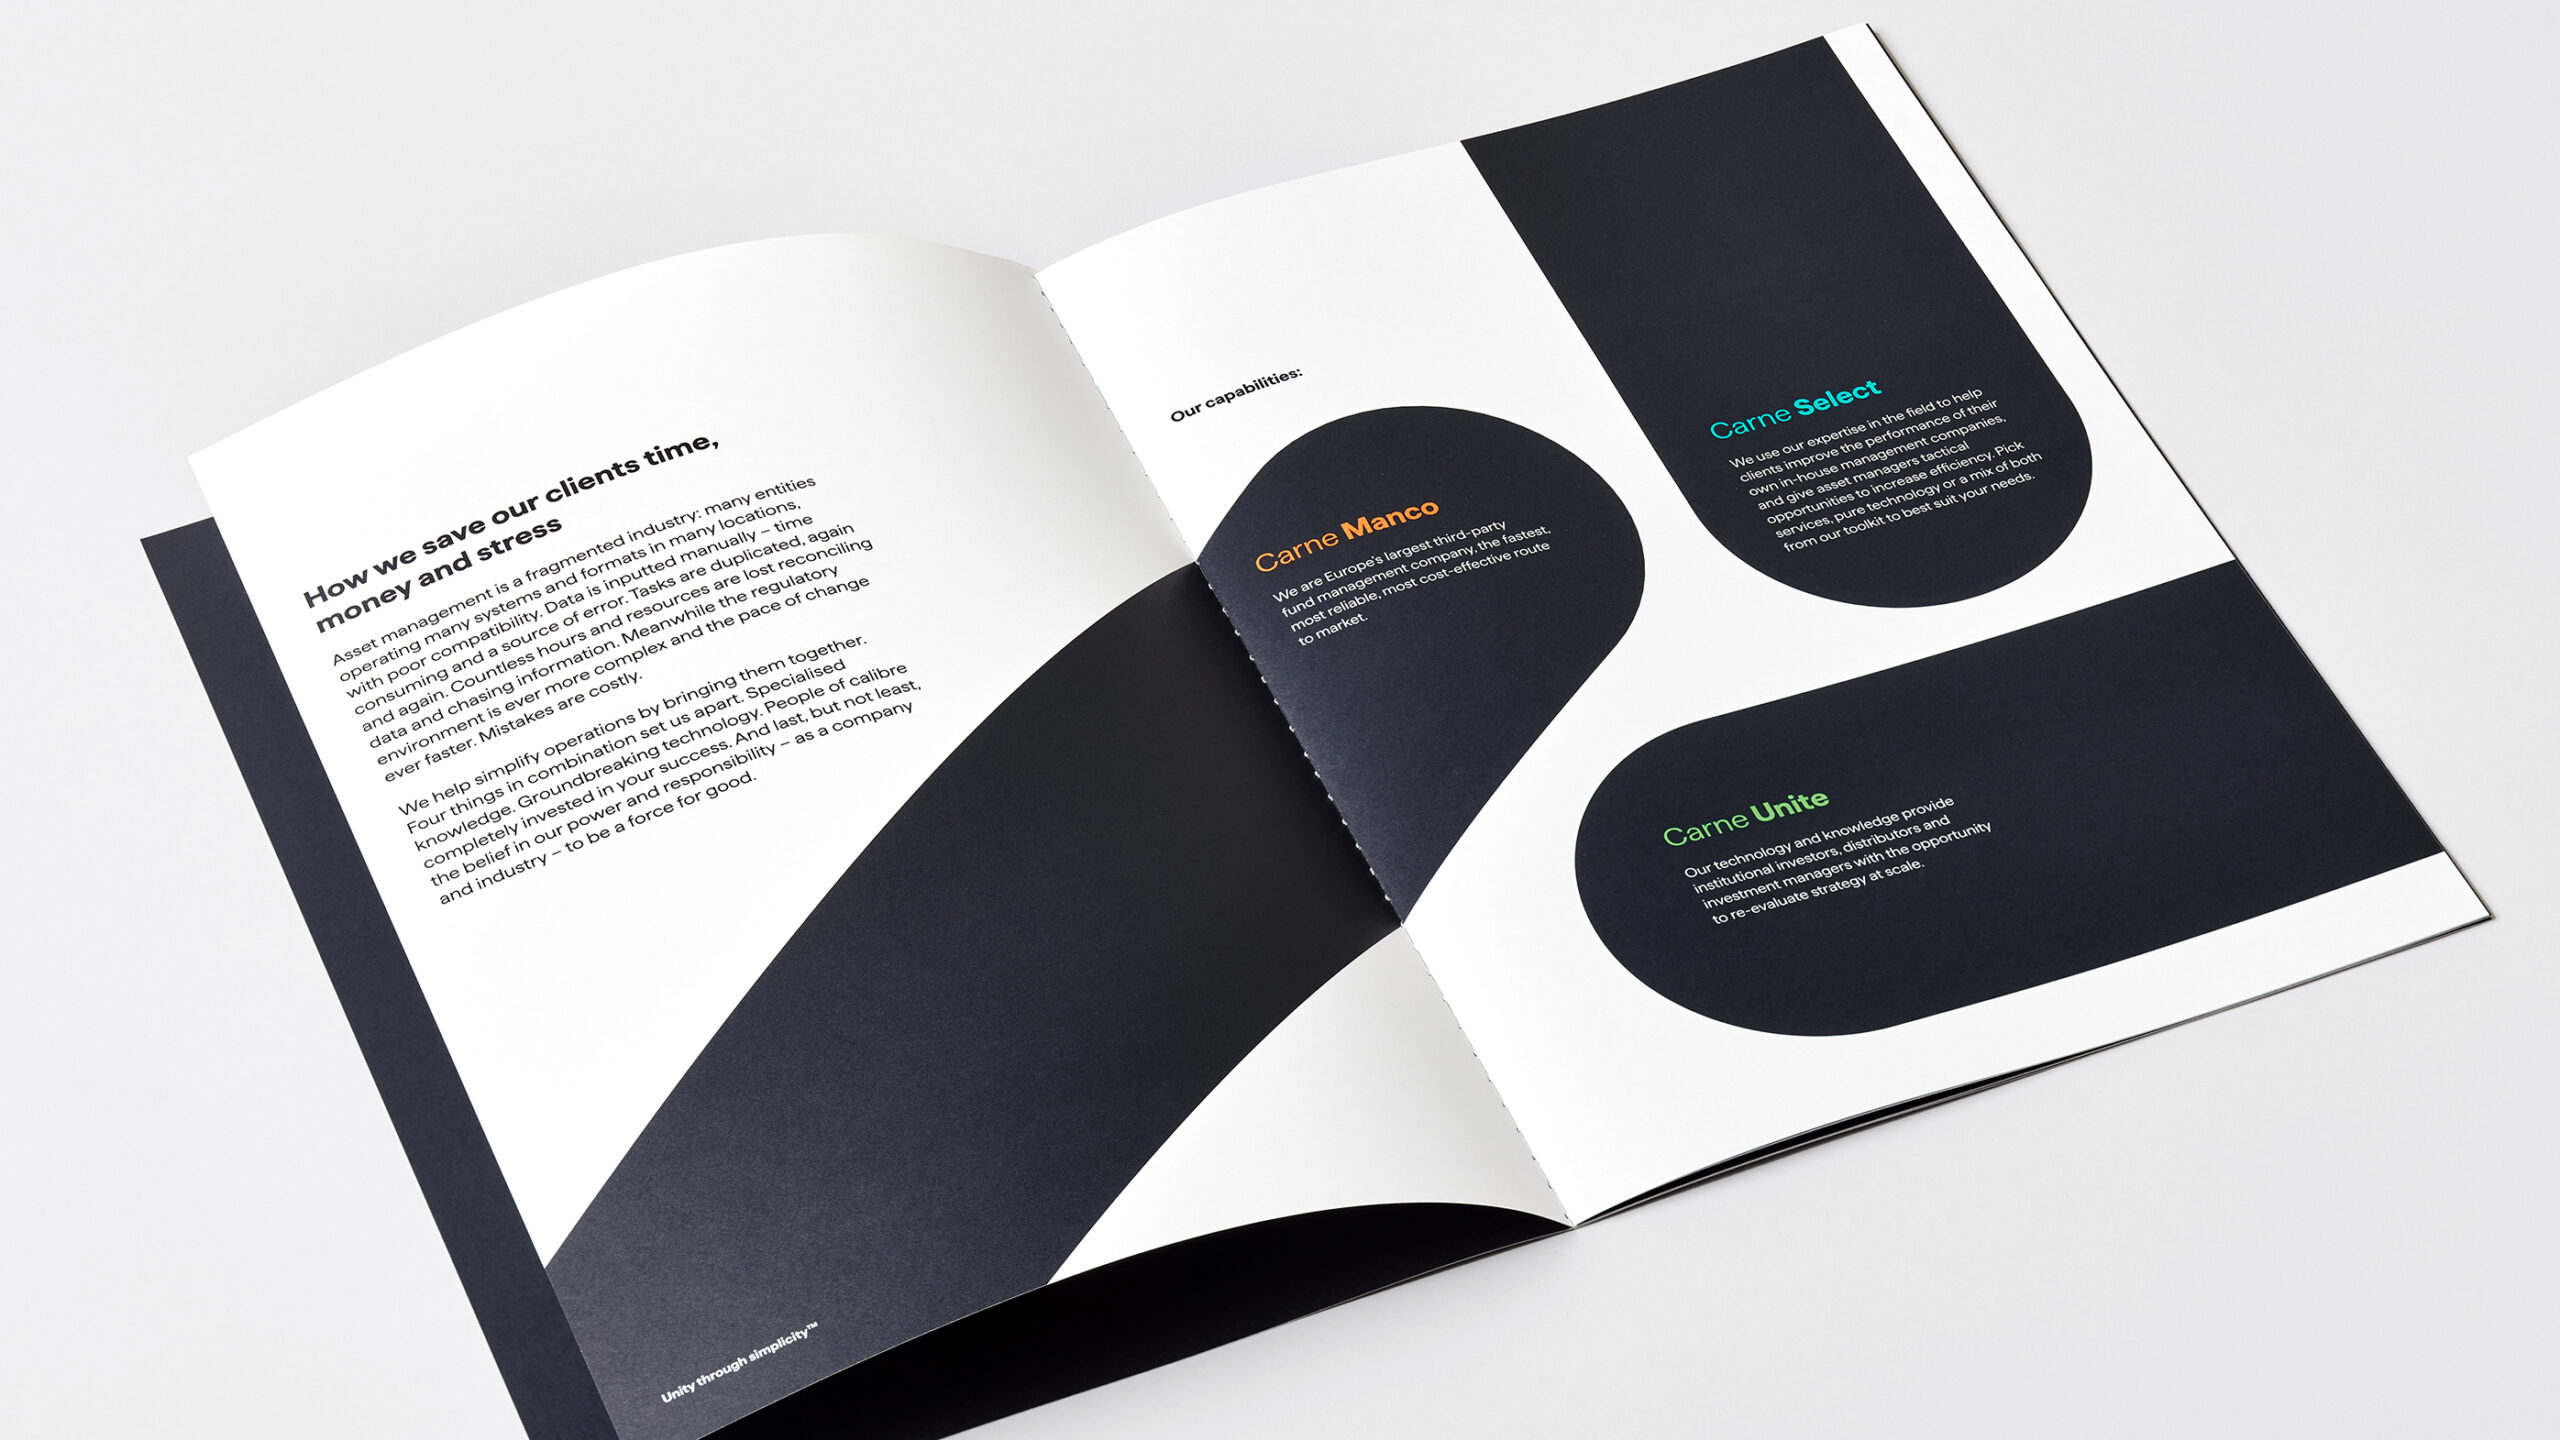 Branded asset management brochure spread design setting out capabilities